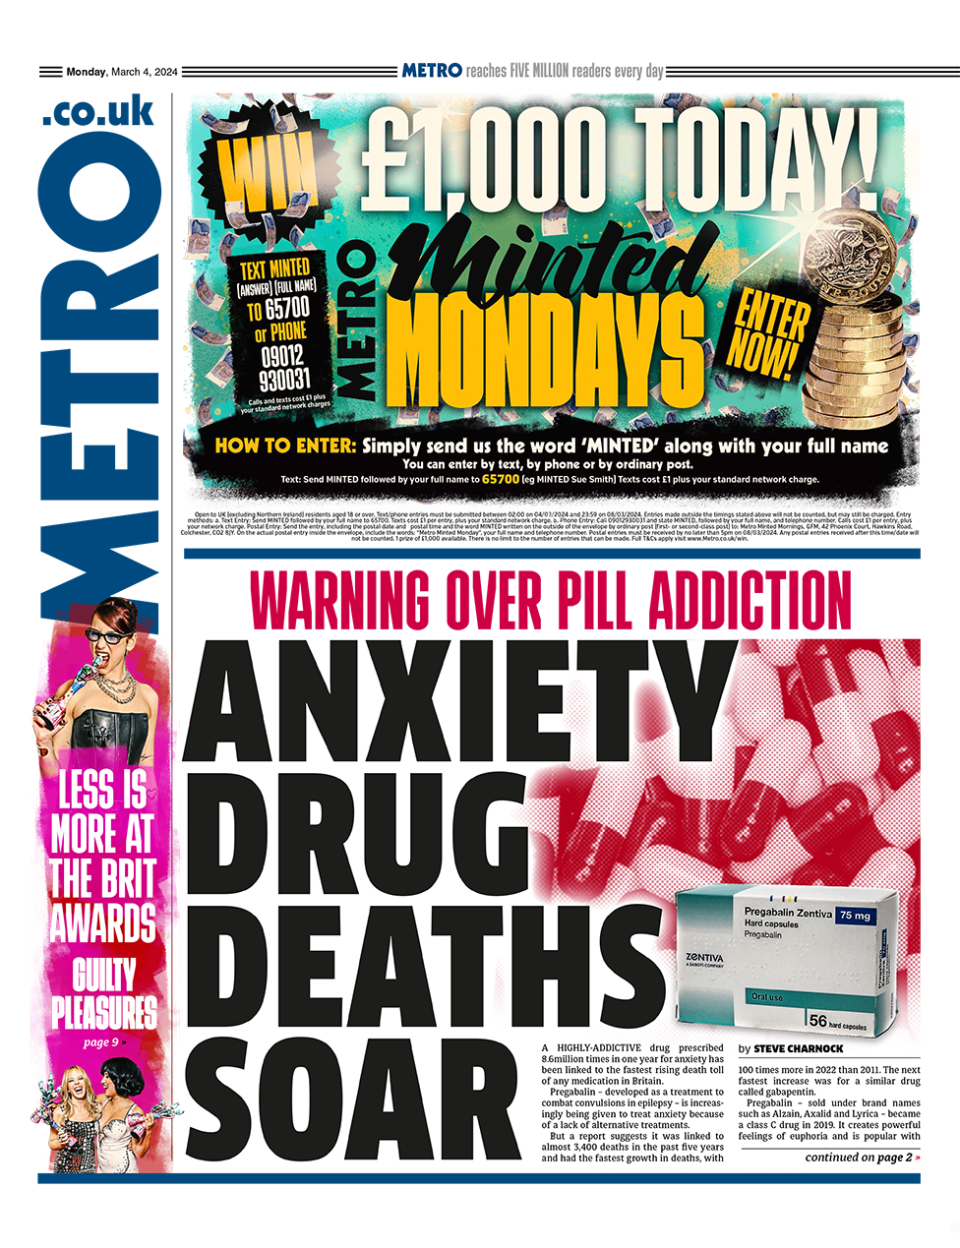 The headline in the Metro reads: "Anxiety drug deaths soar".